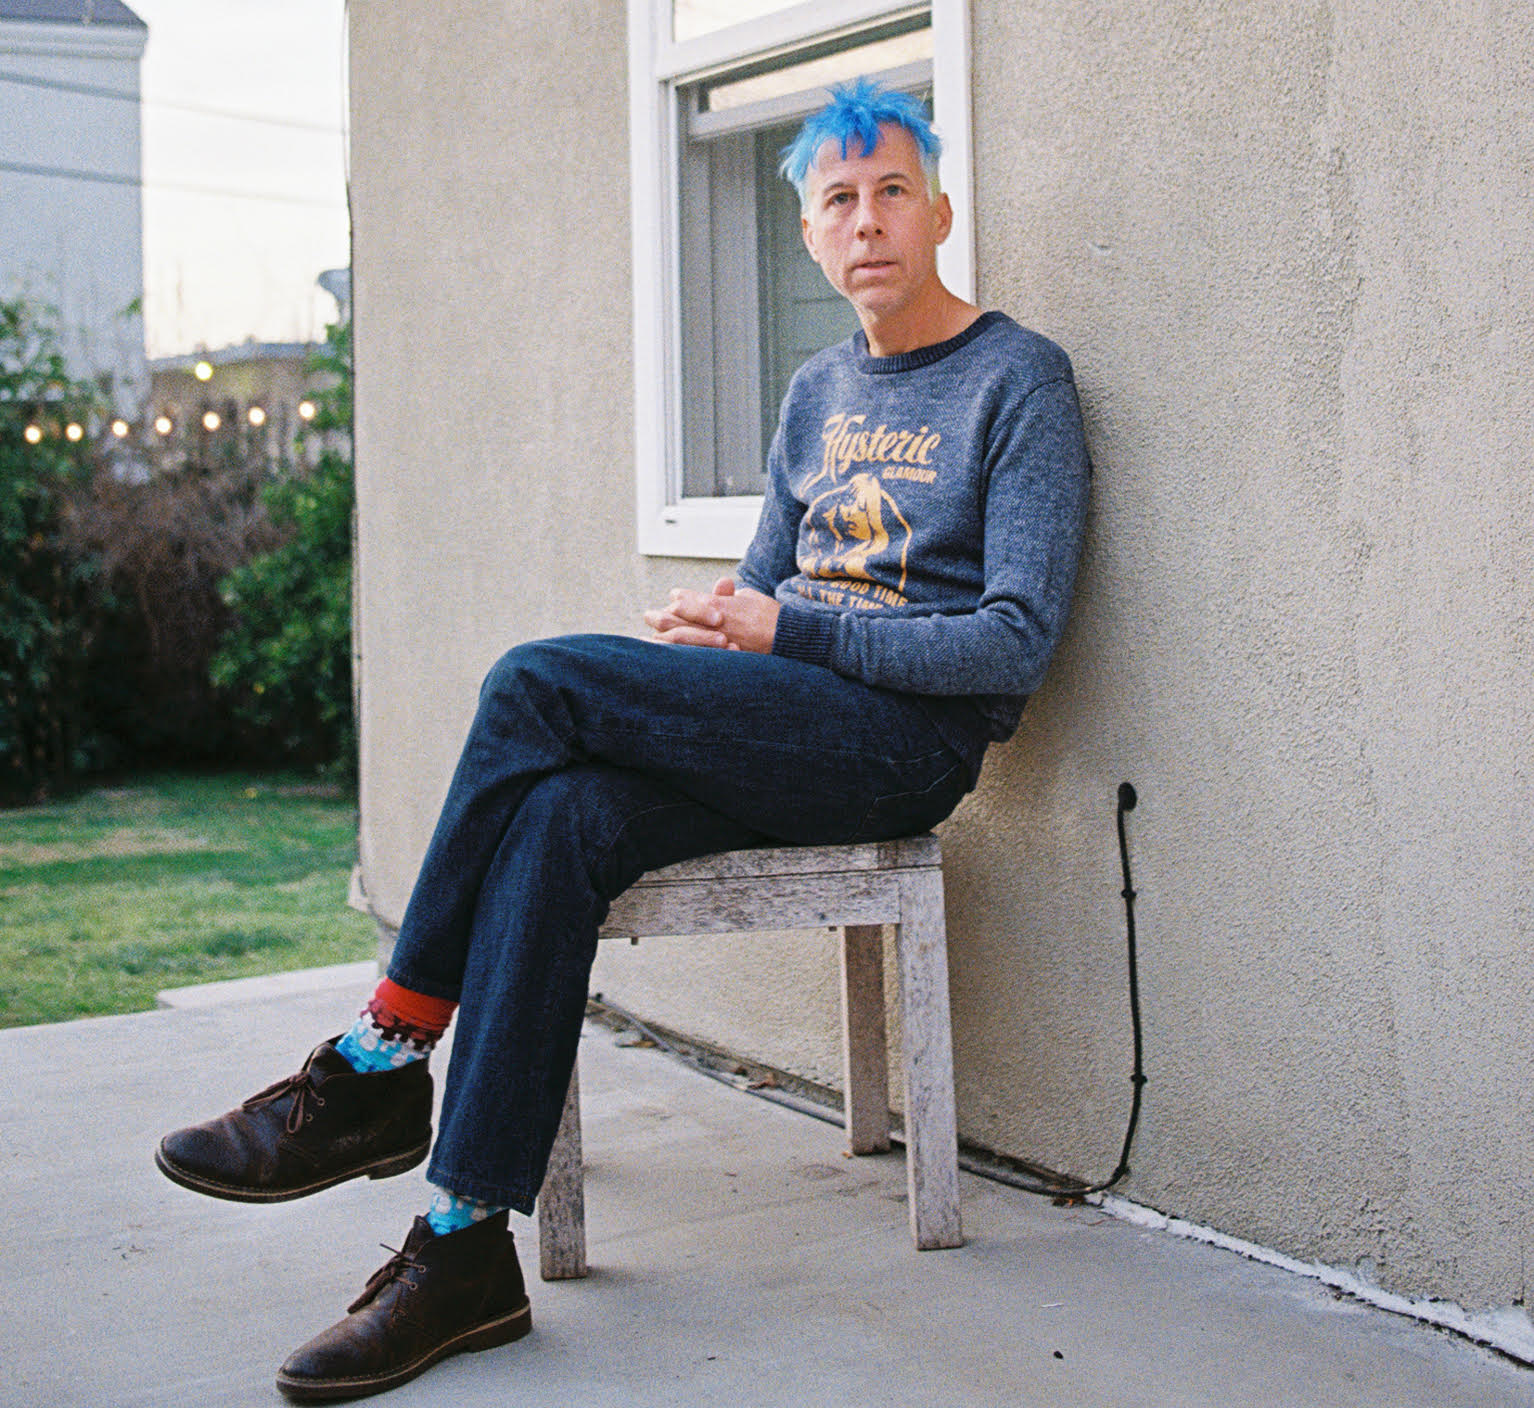 Man with blue hair sits outside on a stool